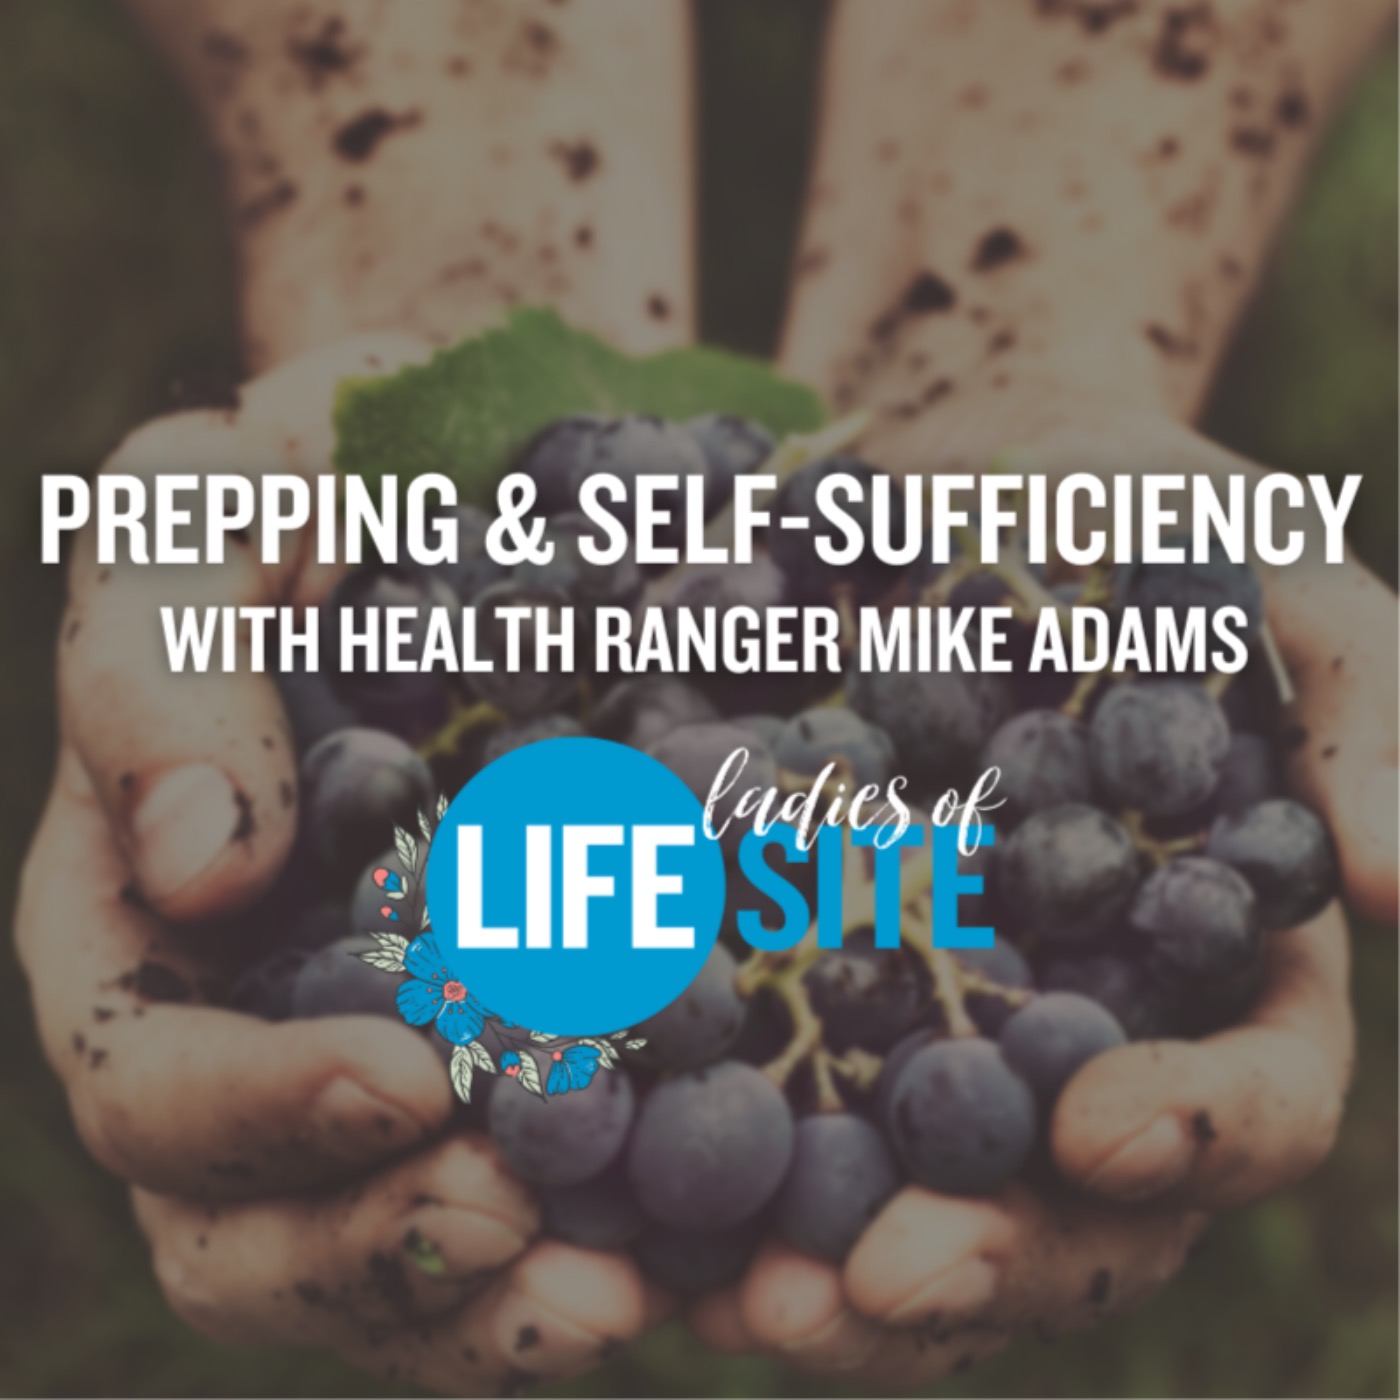 How to be more self-sufficient: Health Ranger Mike Adams shares tips